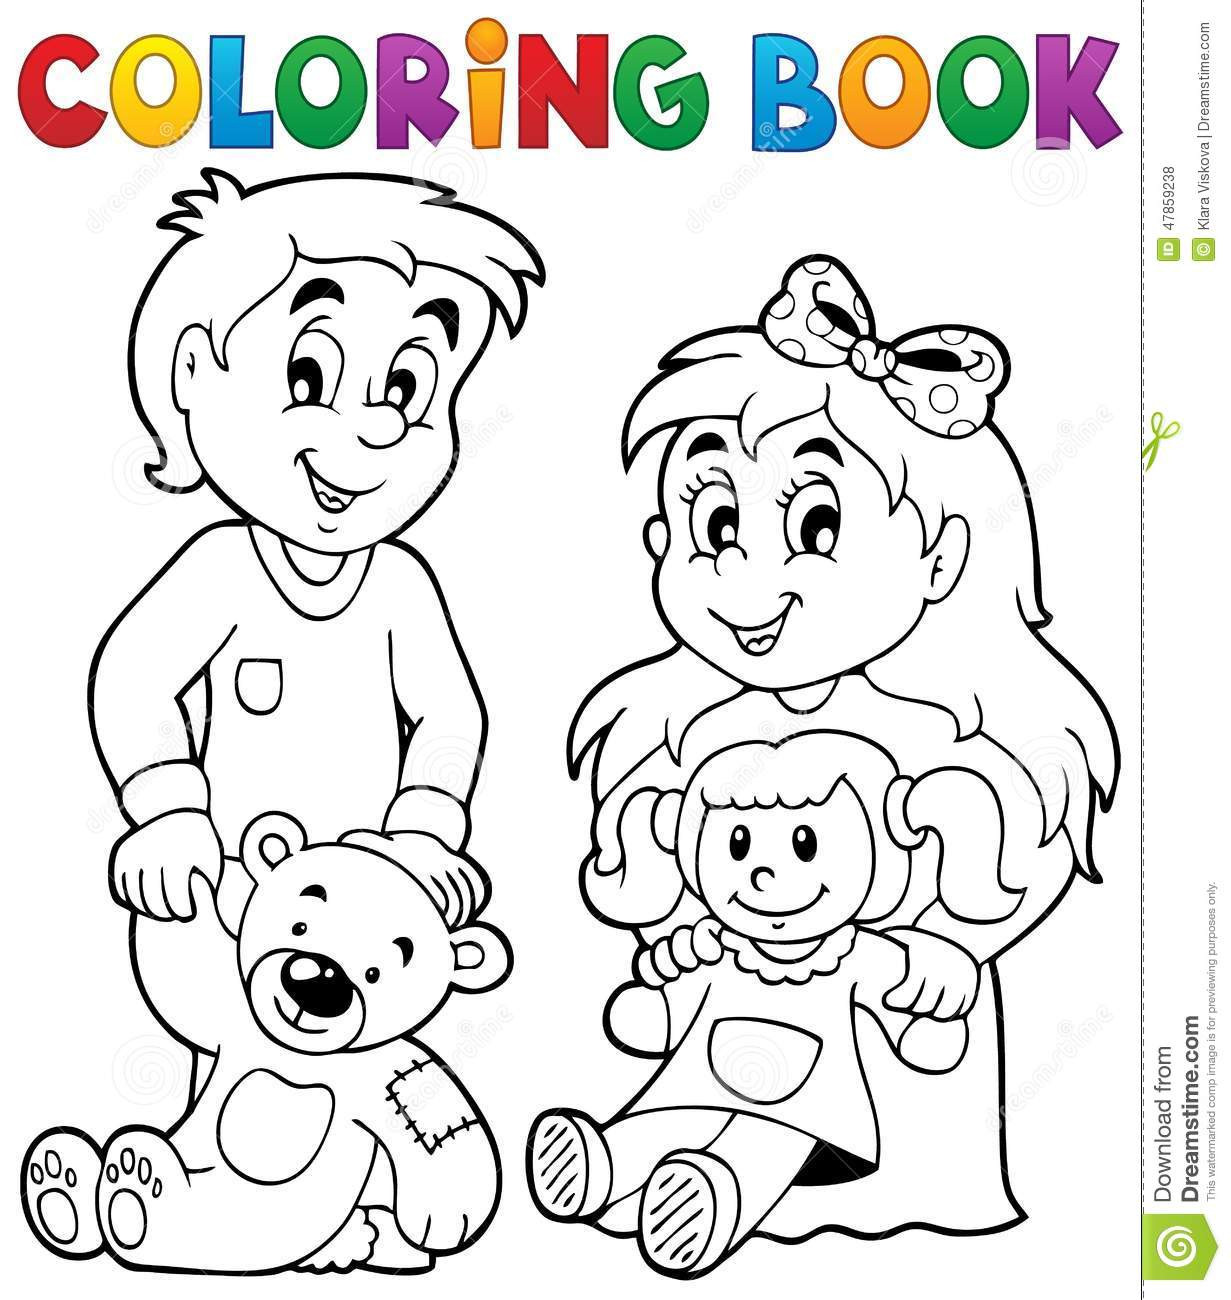 Coloring Book For Toddler
 Coloring Book Children With Toys 1 Stock Vector Image